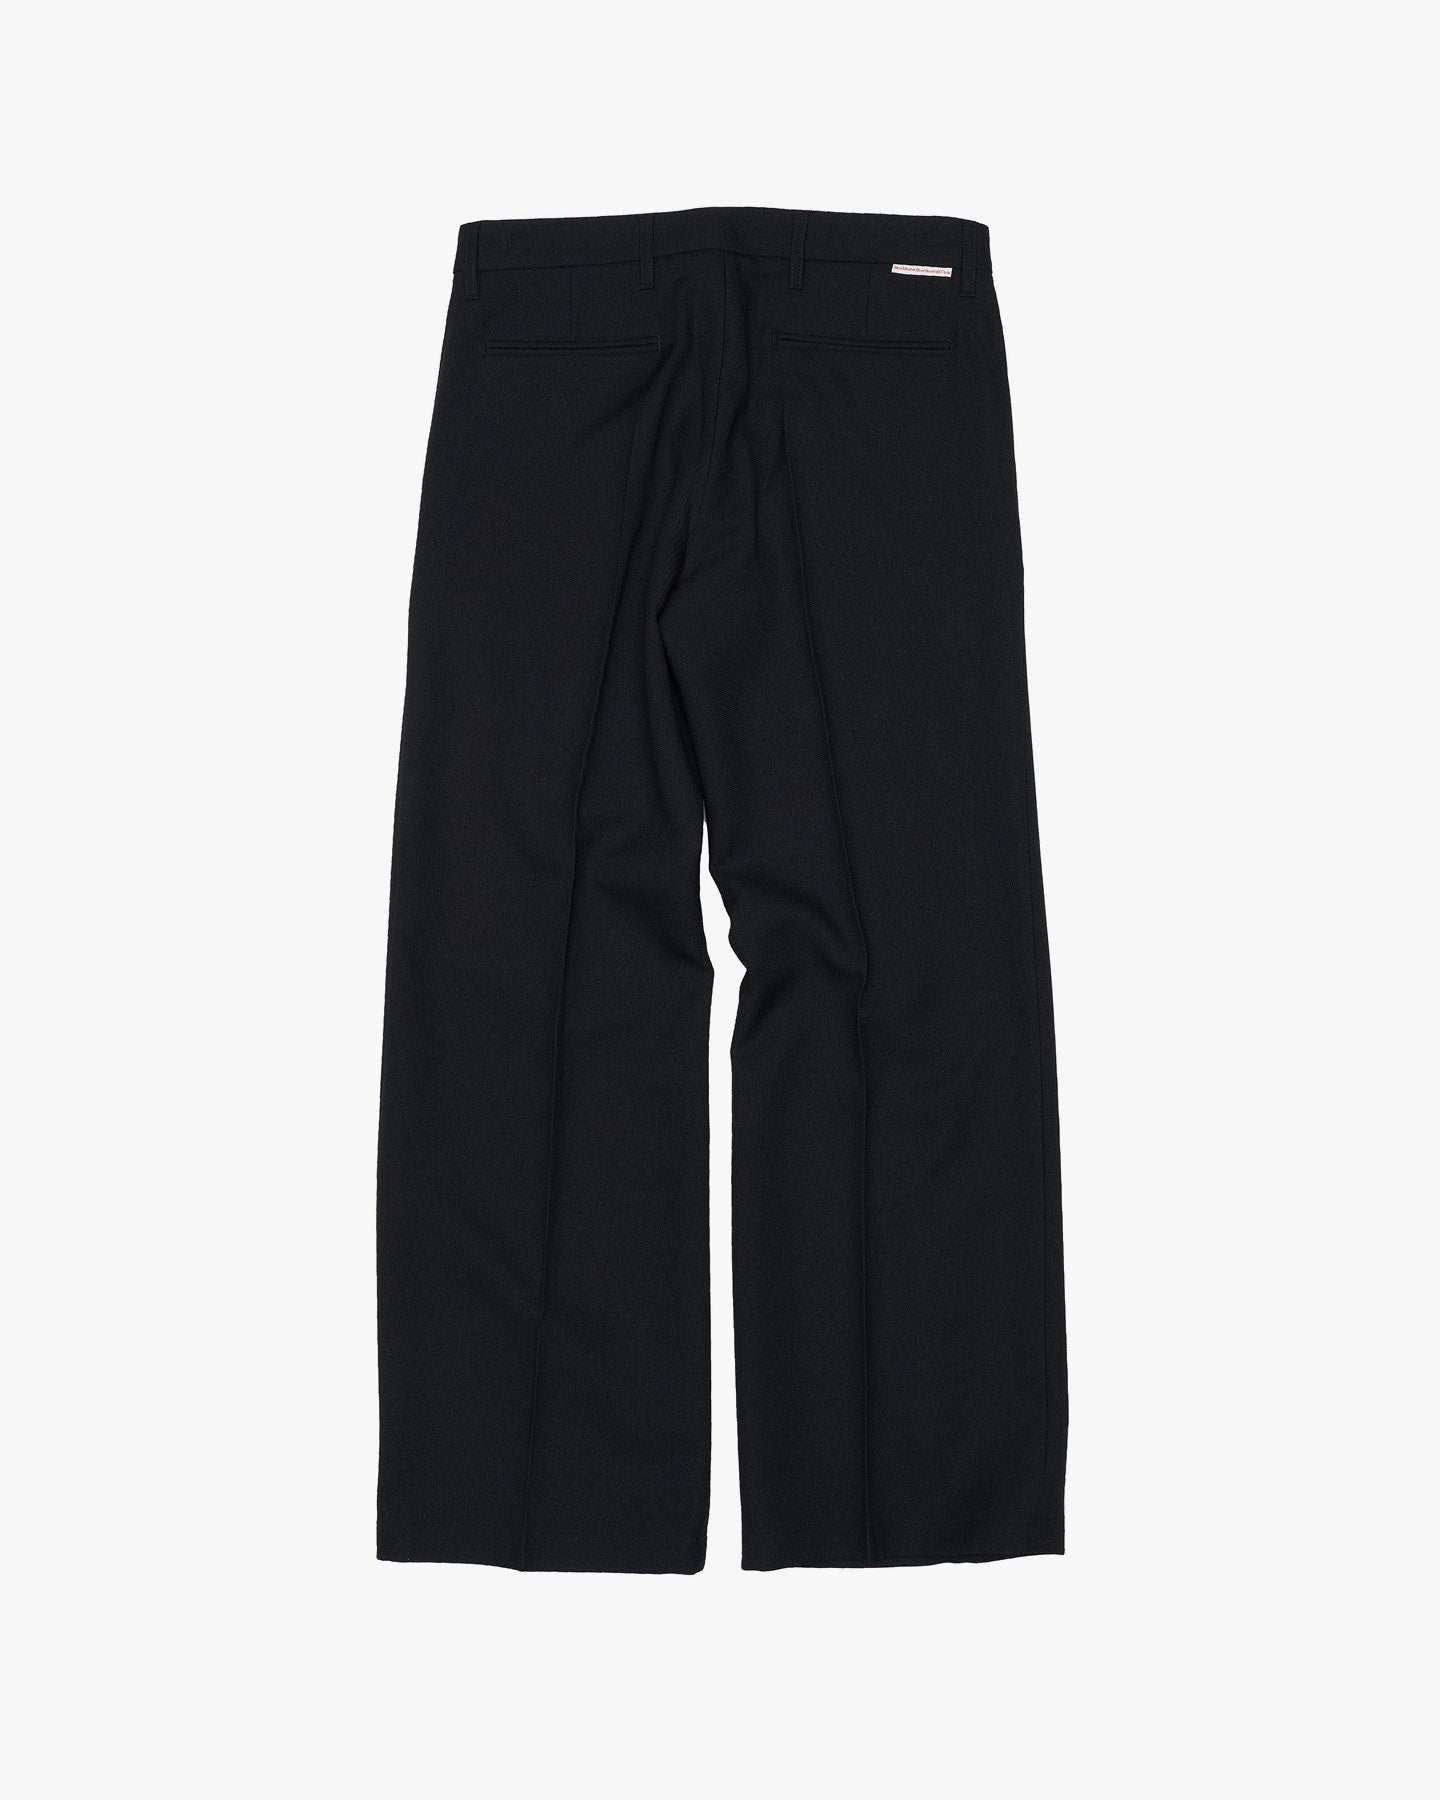 STOCKHOLM (SURFBOARD) CLUB - Tailored trousers